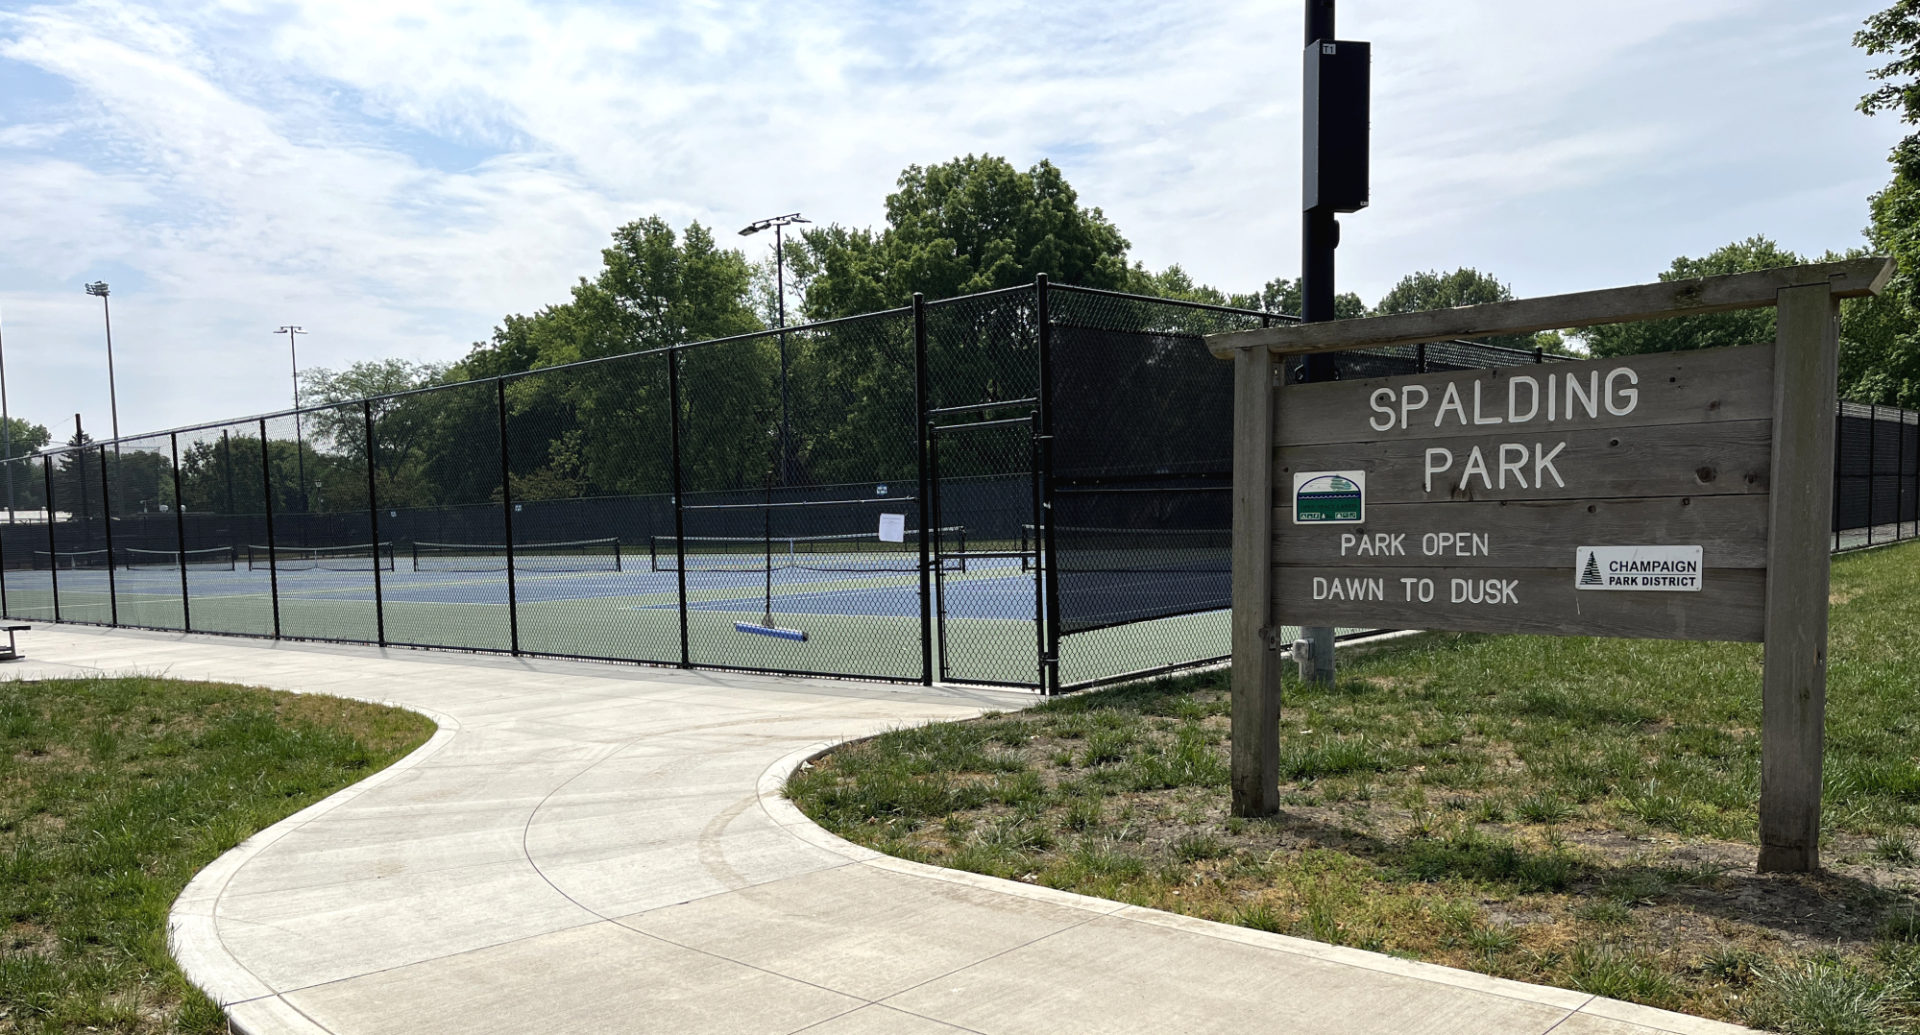 Large wood sign that reads Spalding Park is located near a sidewalk and tennis courts. The courts are to the left of the image.